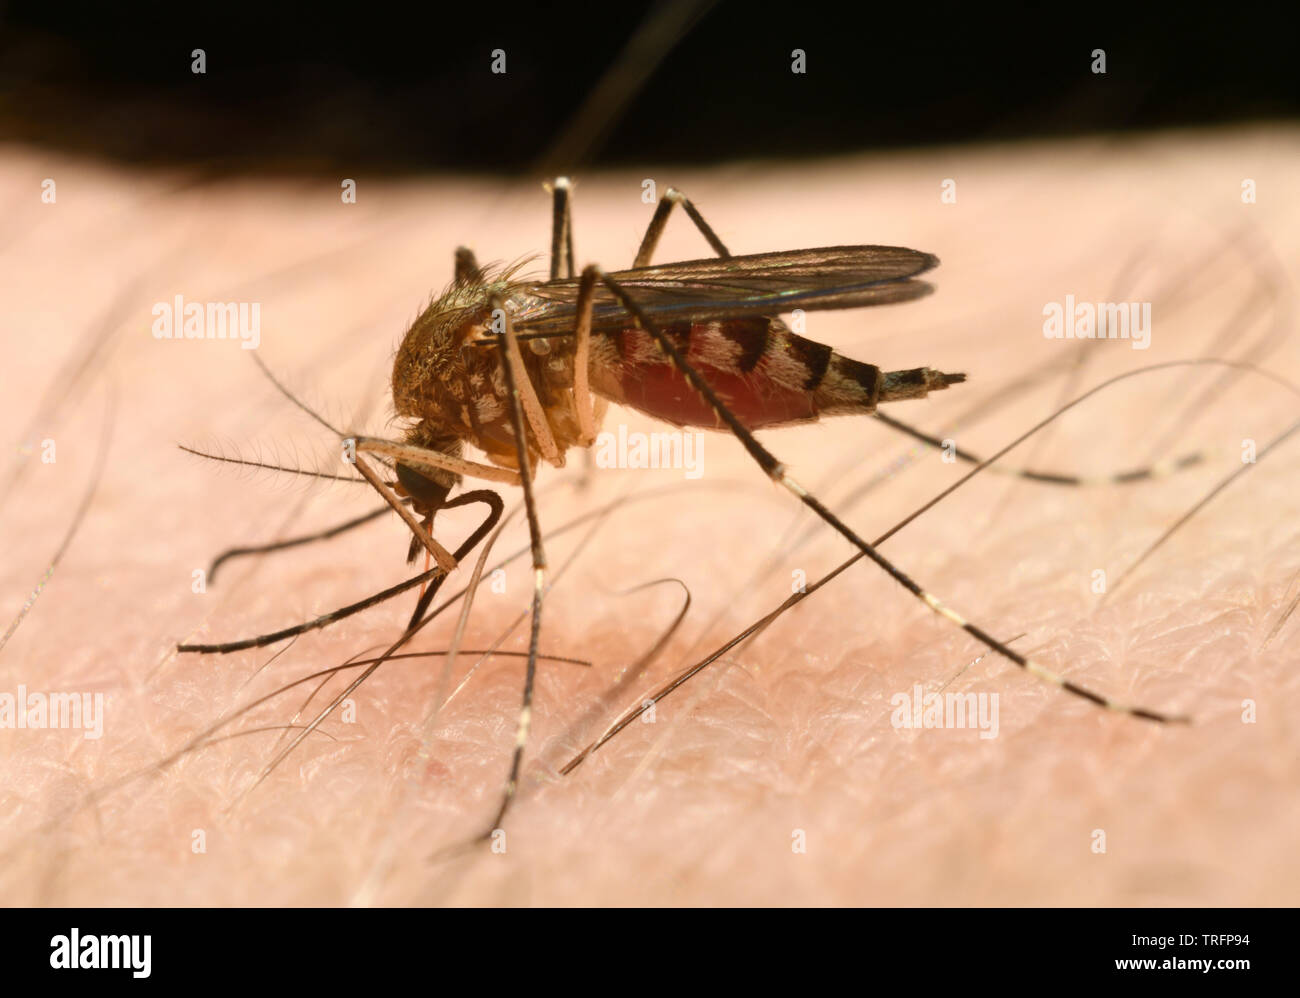 Close up of a female Mosquito Culex pipiens abdomen engorging with a blood meal by puncturing human skin with needle like proboscis Stock Photo